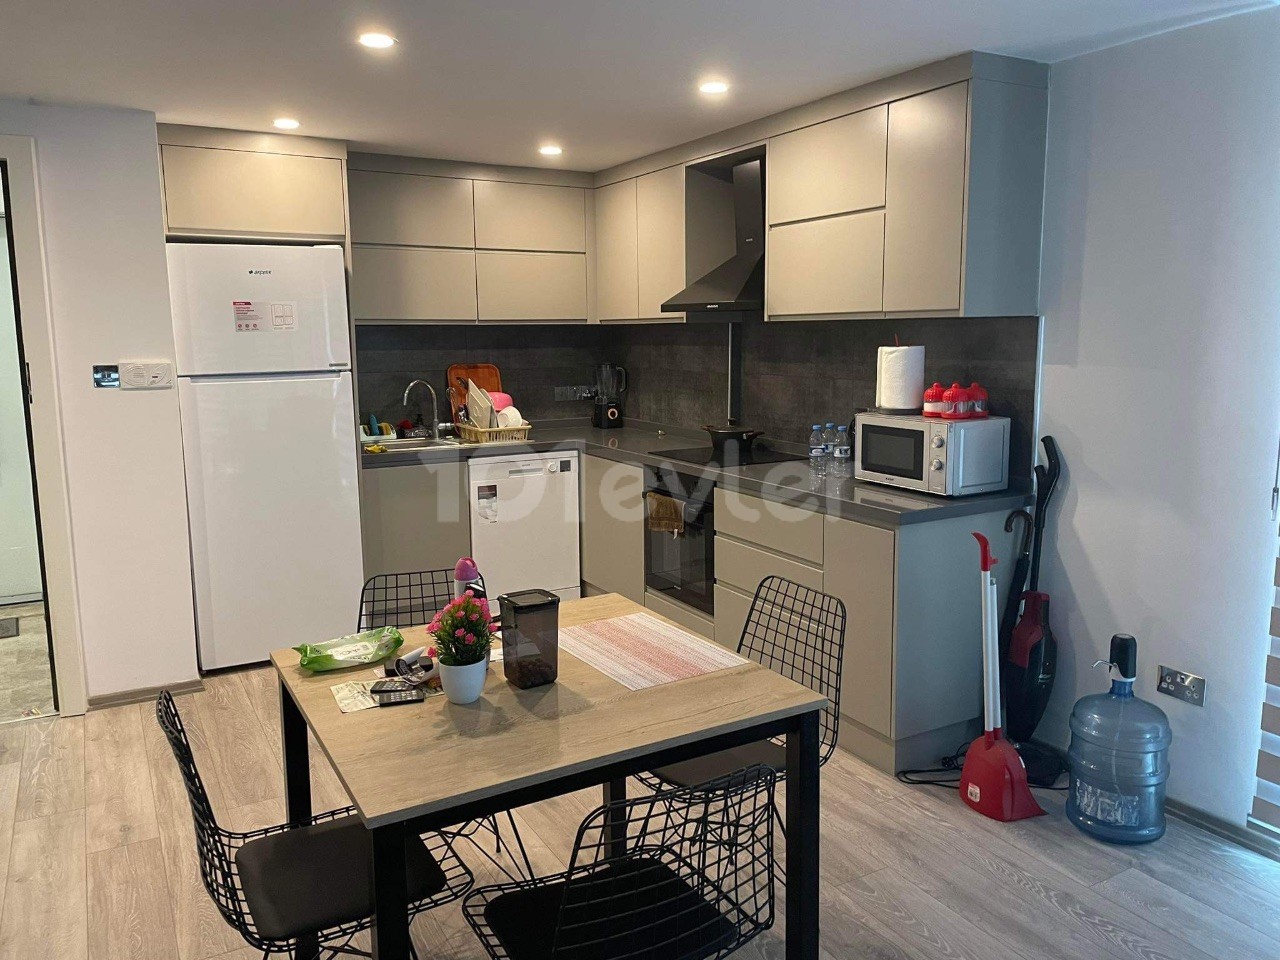 ULTRA LUXURY 1+1 FLAT IN KYRENIA CENTER AKACAN WITH EXTENSIVE FACILITIES SUCH AS SWIMMING POOL AND PARKING PARKING FULL CITY VIEW AND 2 BALCONIES..